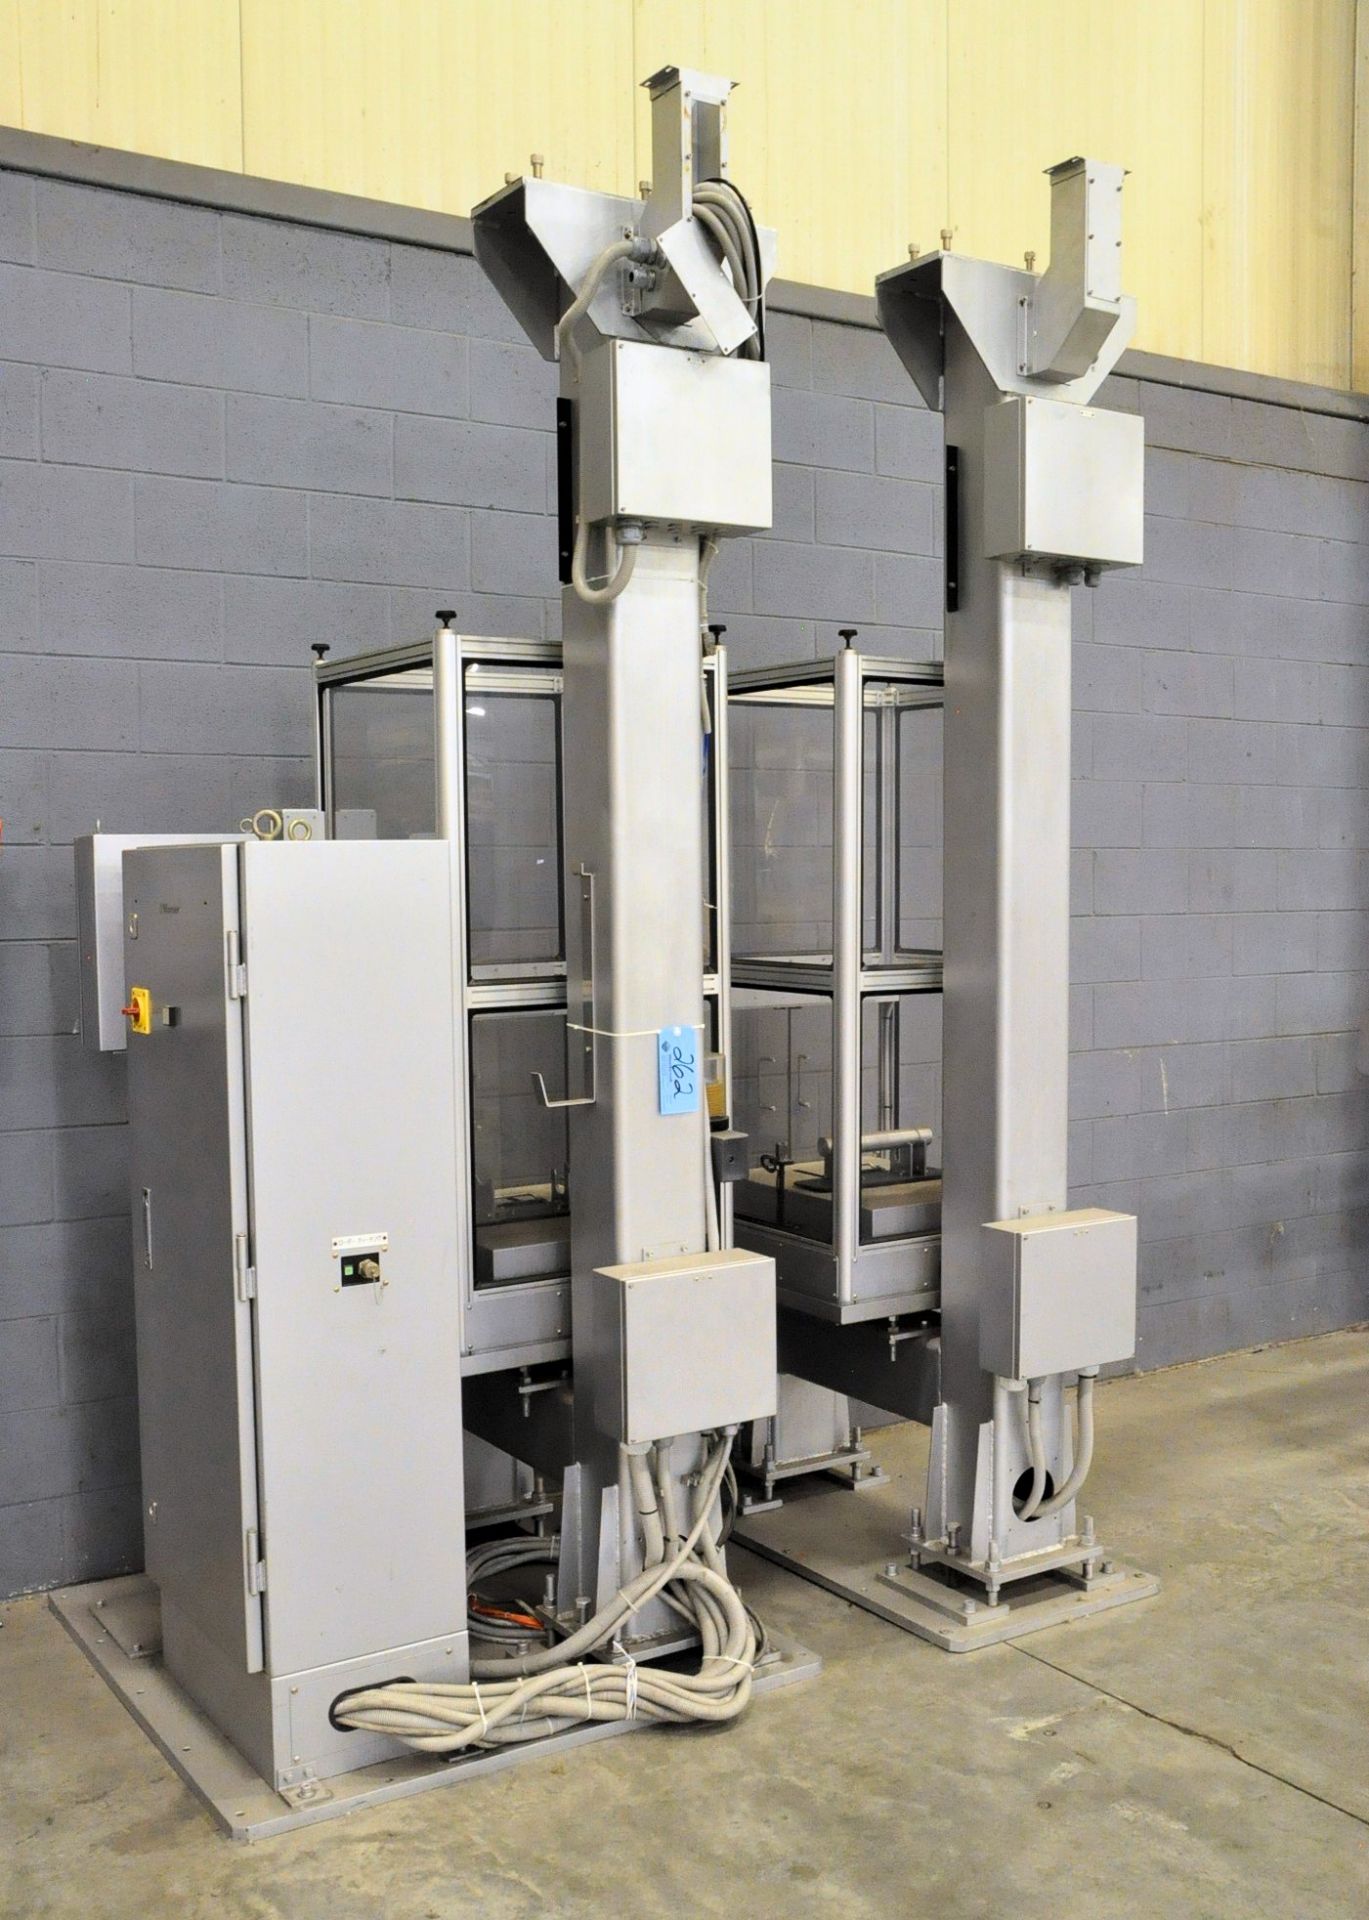 Maxrotec 24' Gantry System Complete with Mitsubishi and Fanuc Controls (Currently Dismantled) - Image 2 of 8